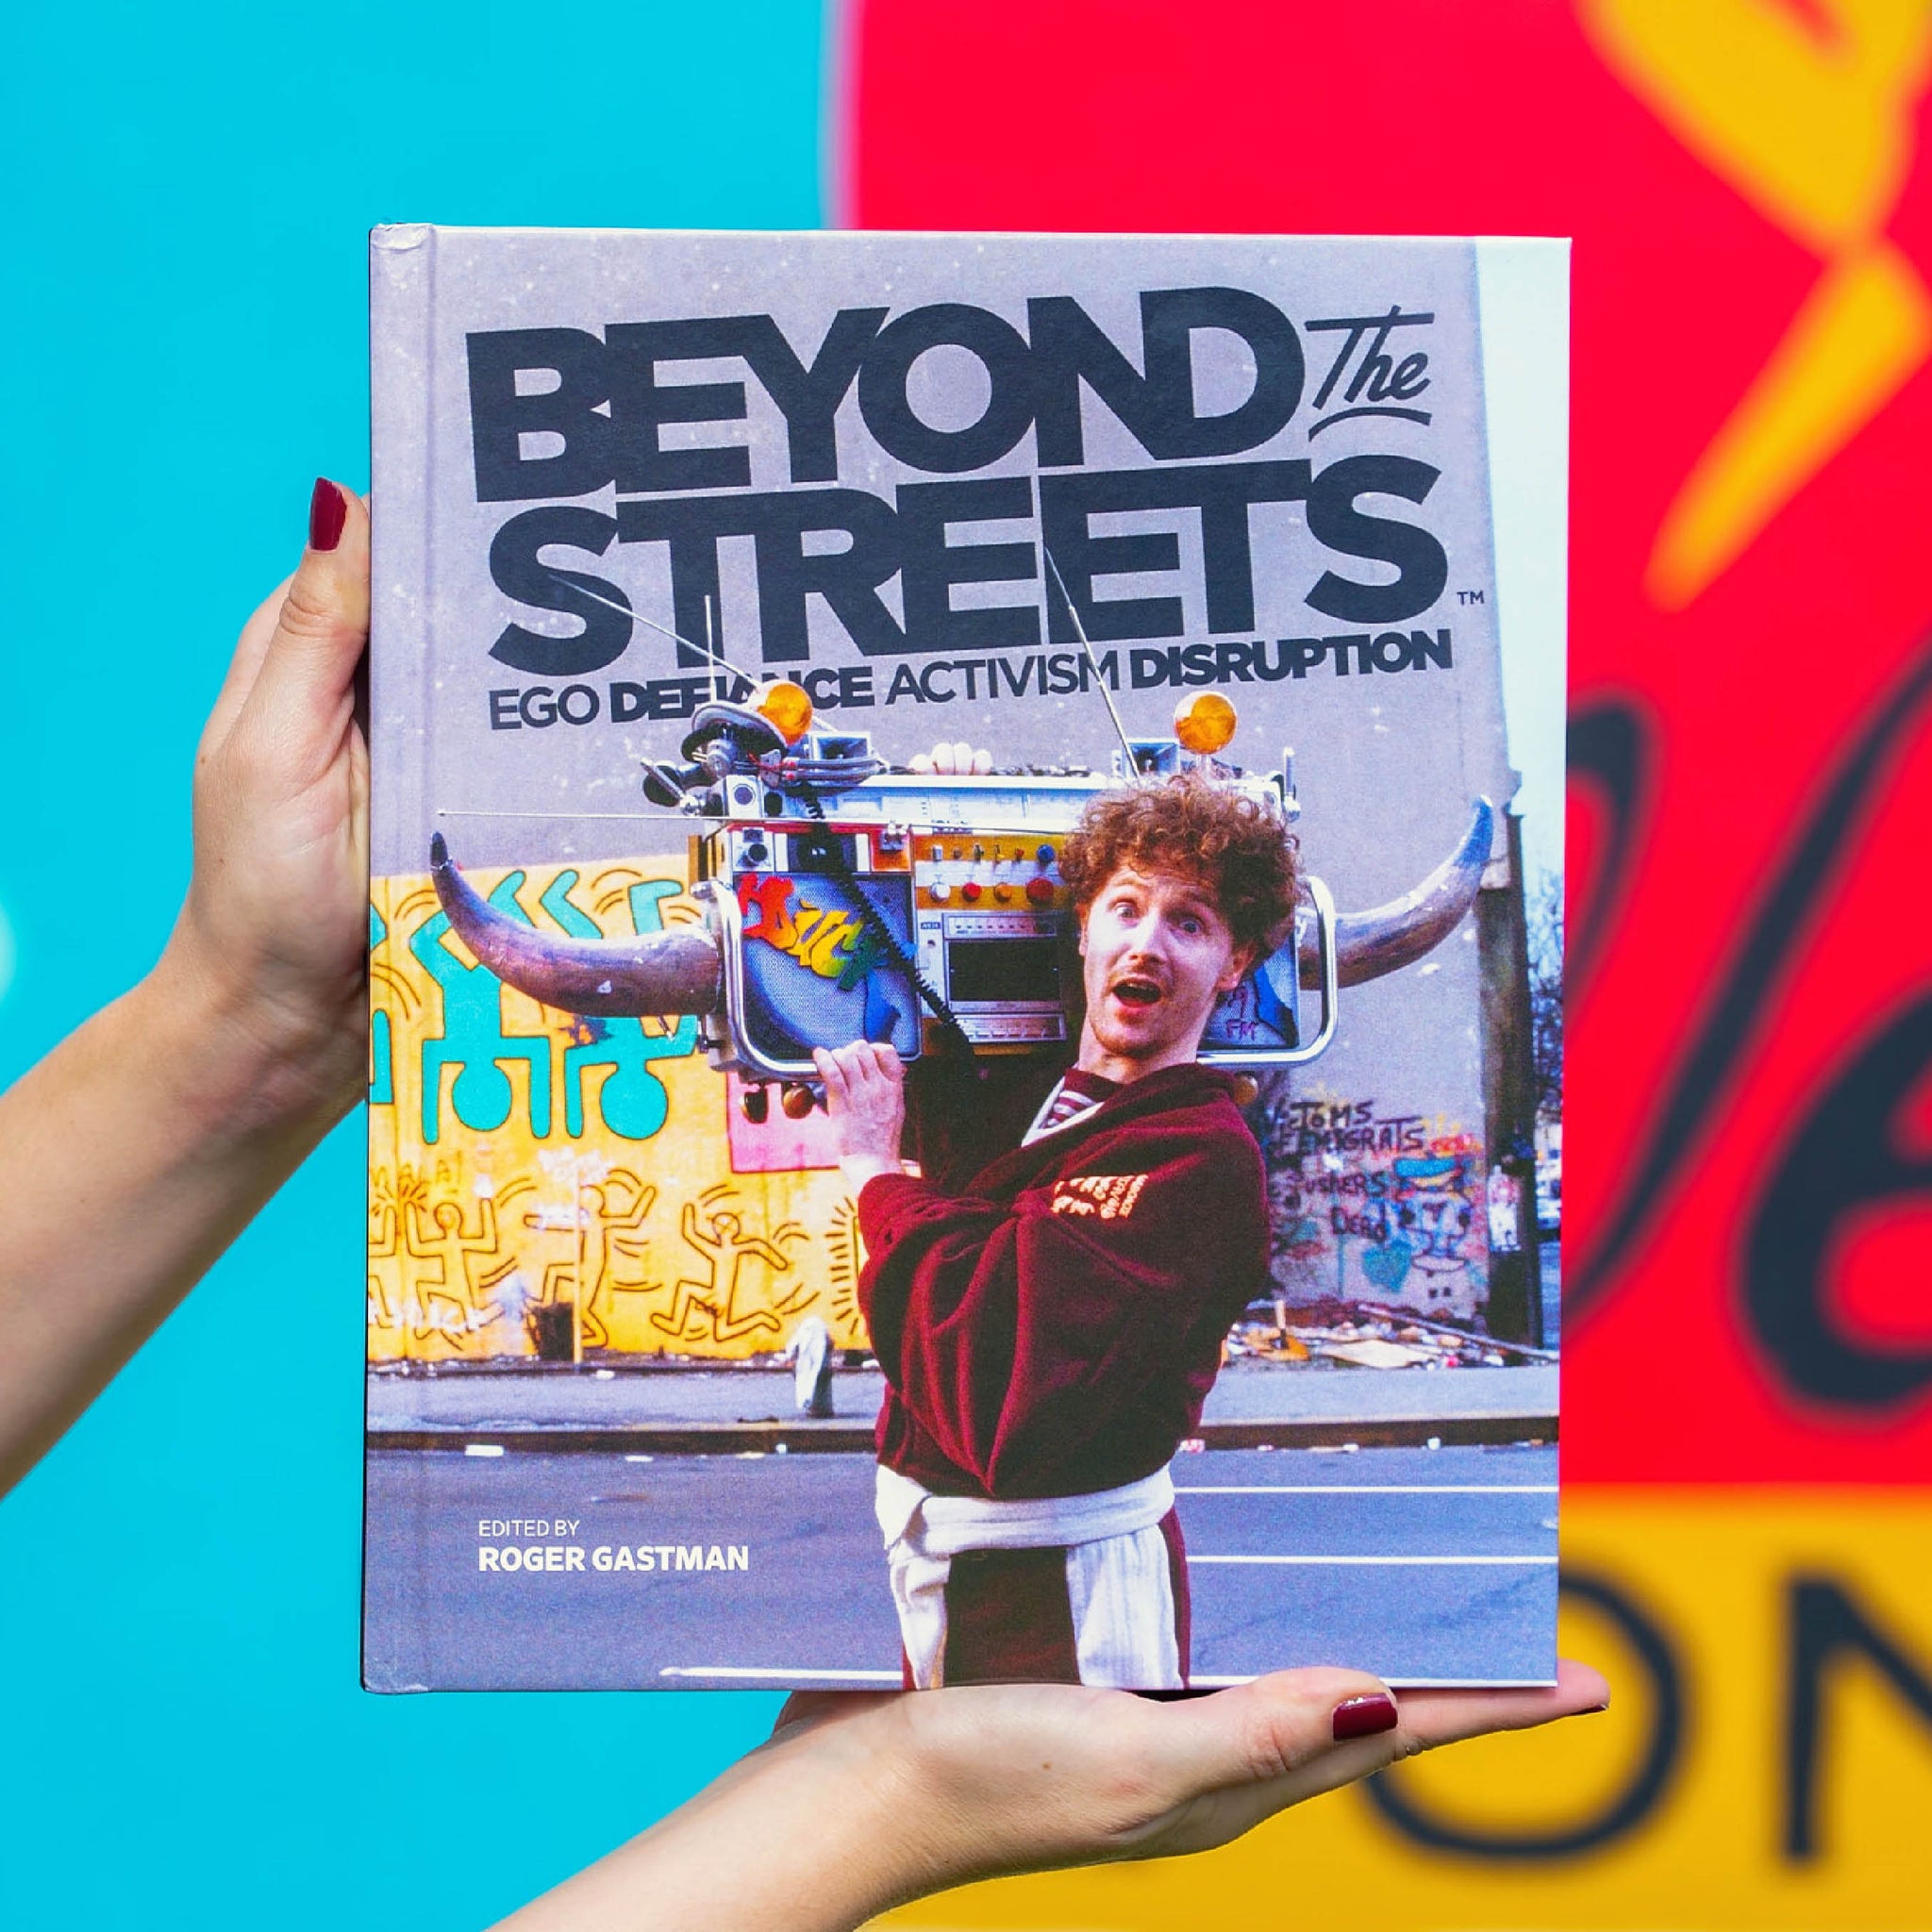 Beyond The Streets & Saatchi Gallery: London Companion Book